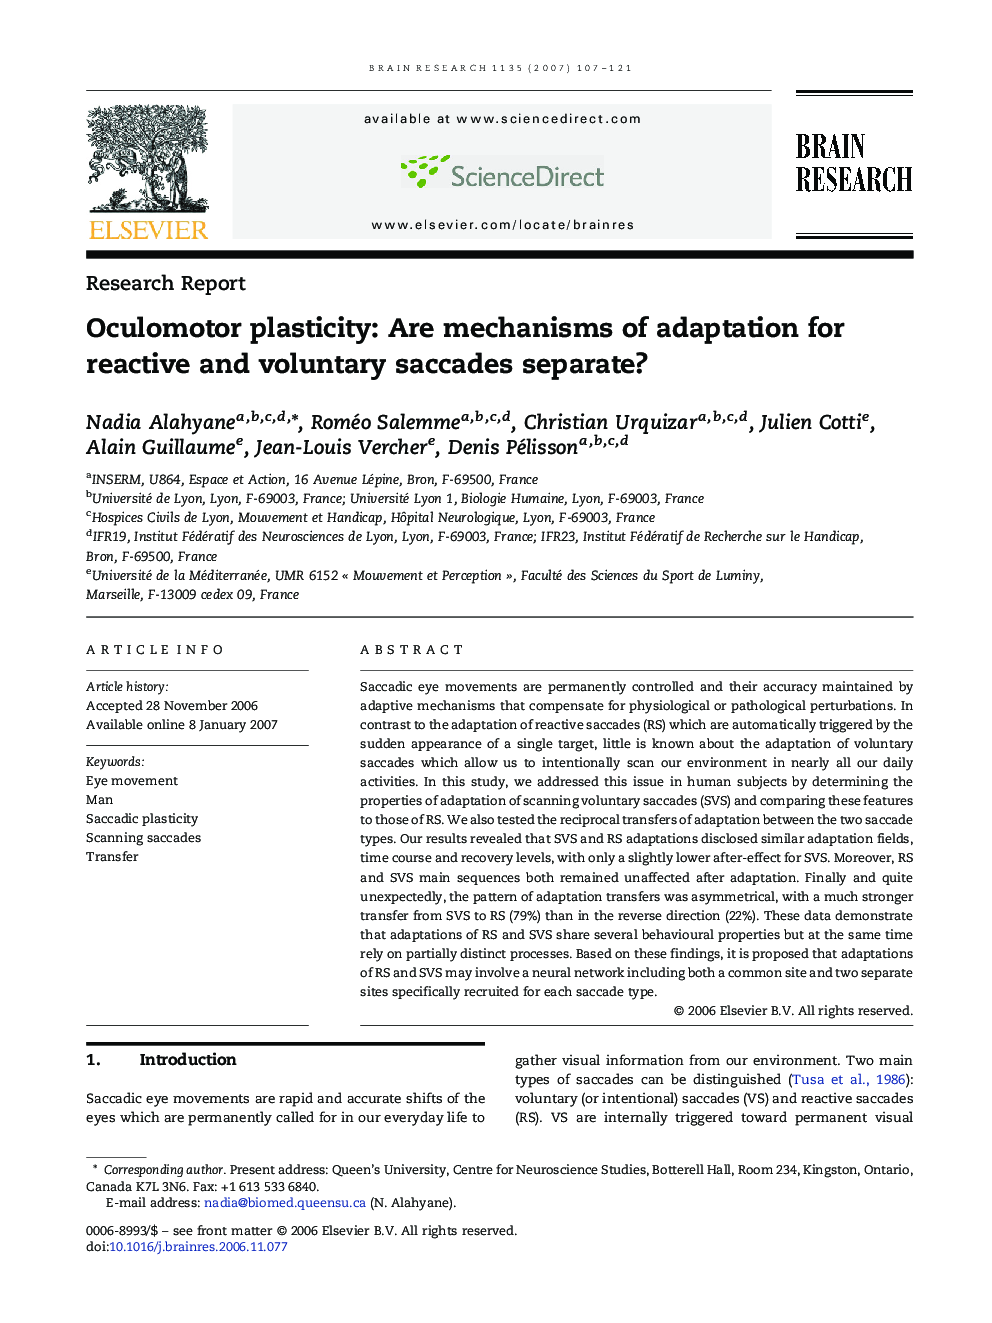 Research ReportOculomotor plasticity: Are mechanisms of adaptation for reactive and voluntary saccades separate?